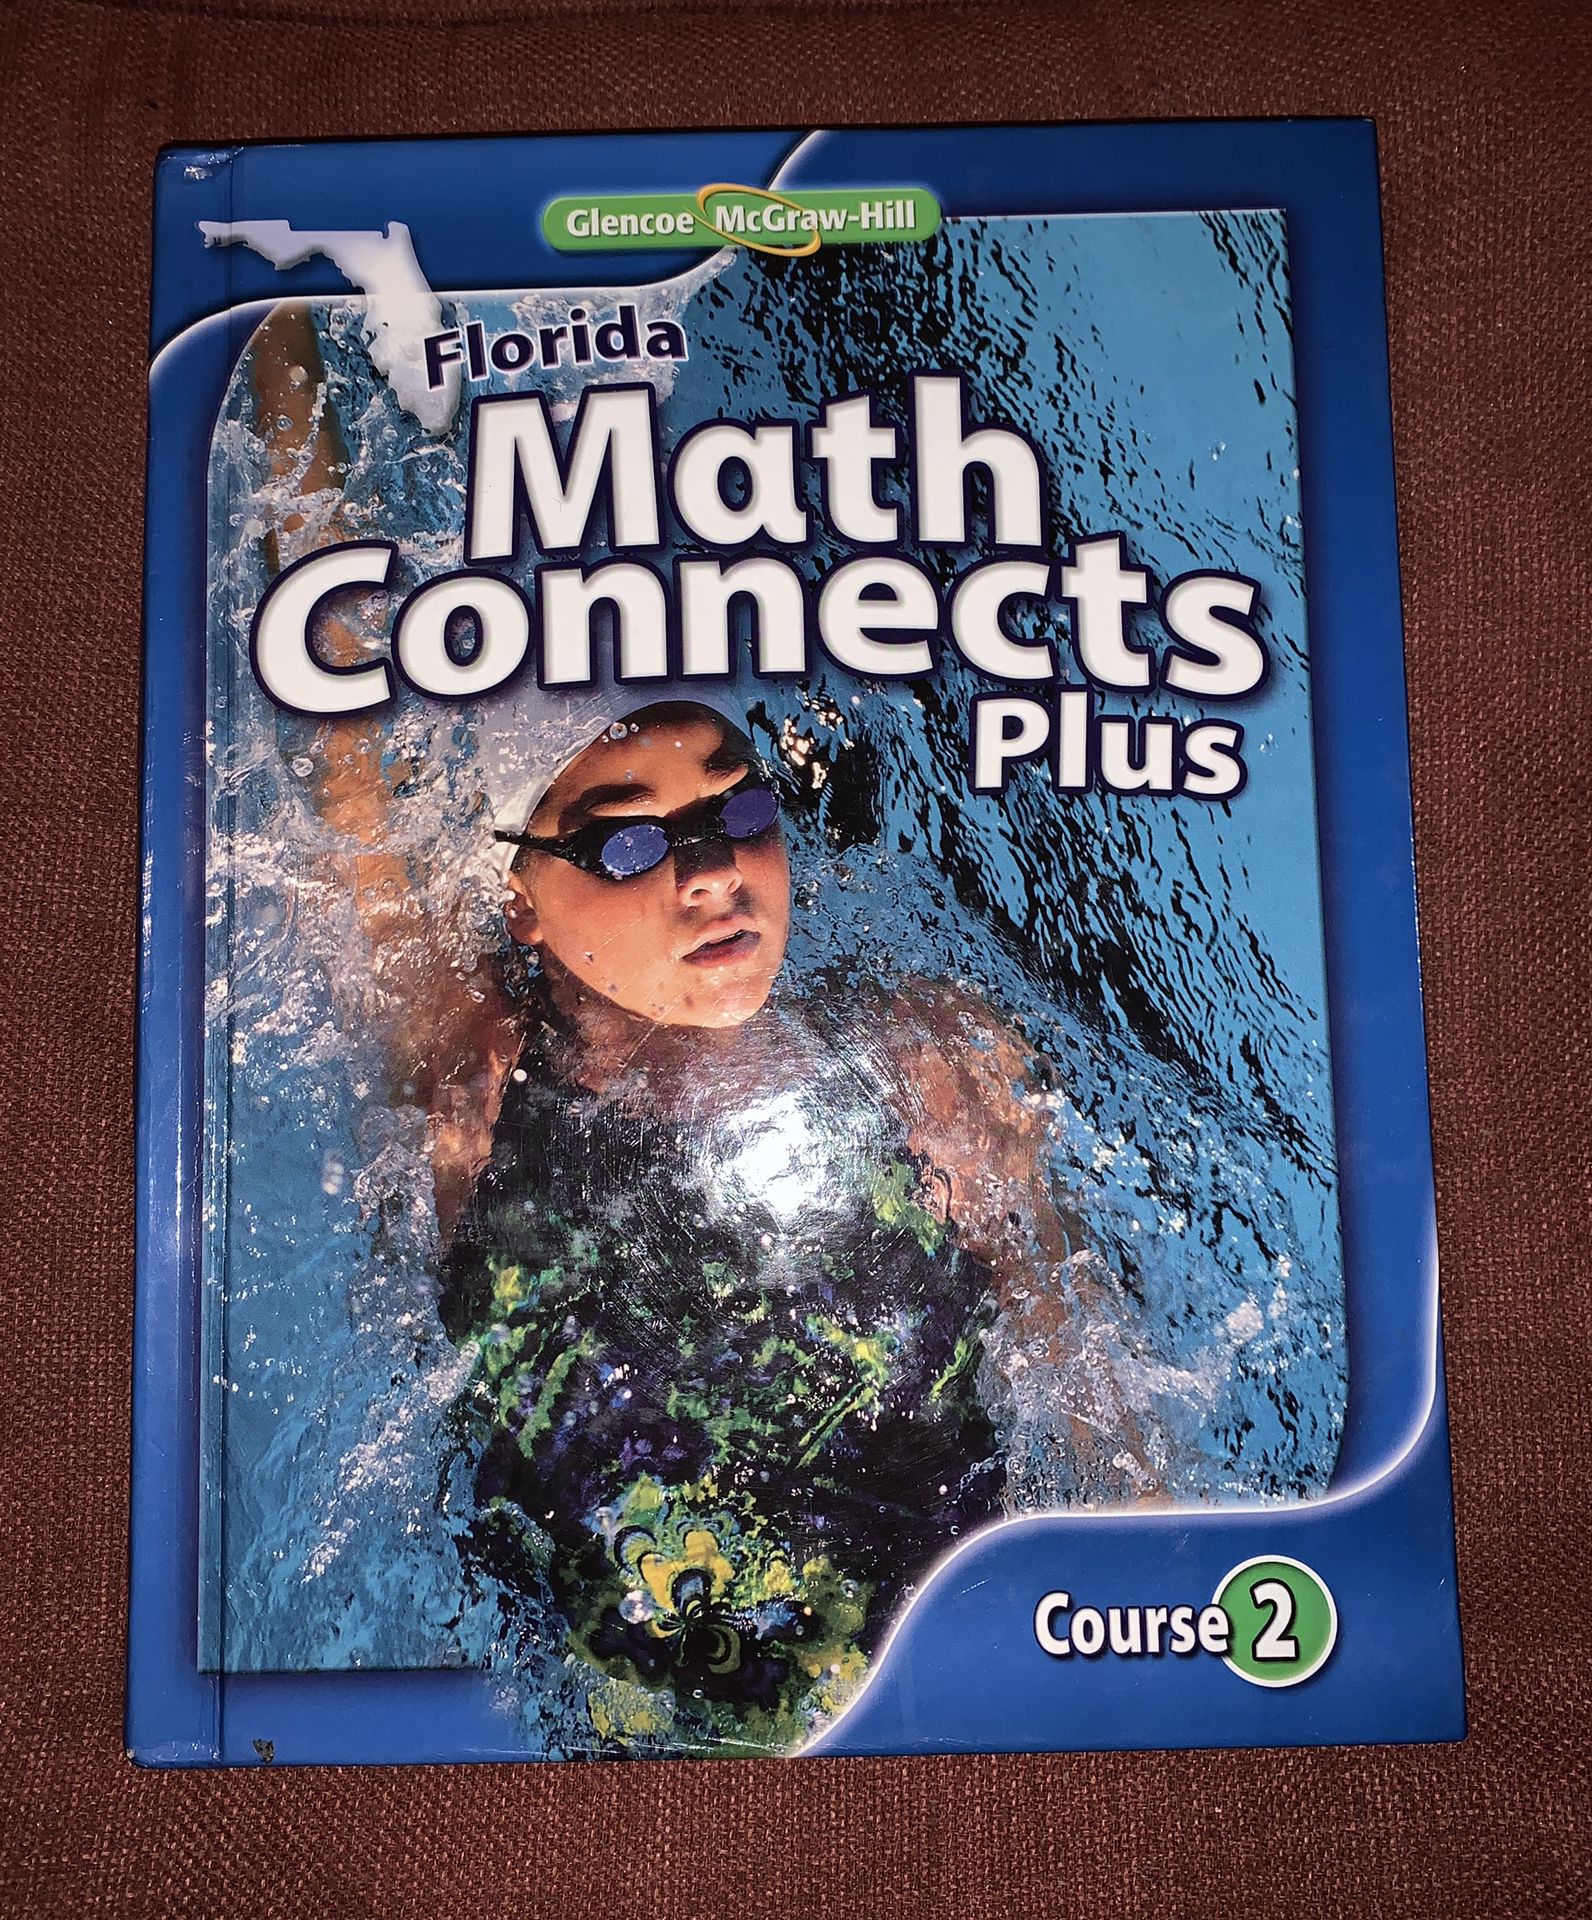 Like new “Florida Math Connects Plus: Course 2” textbook